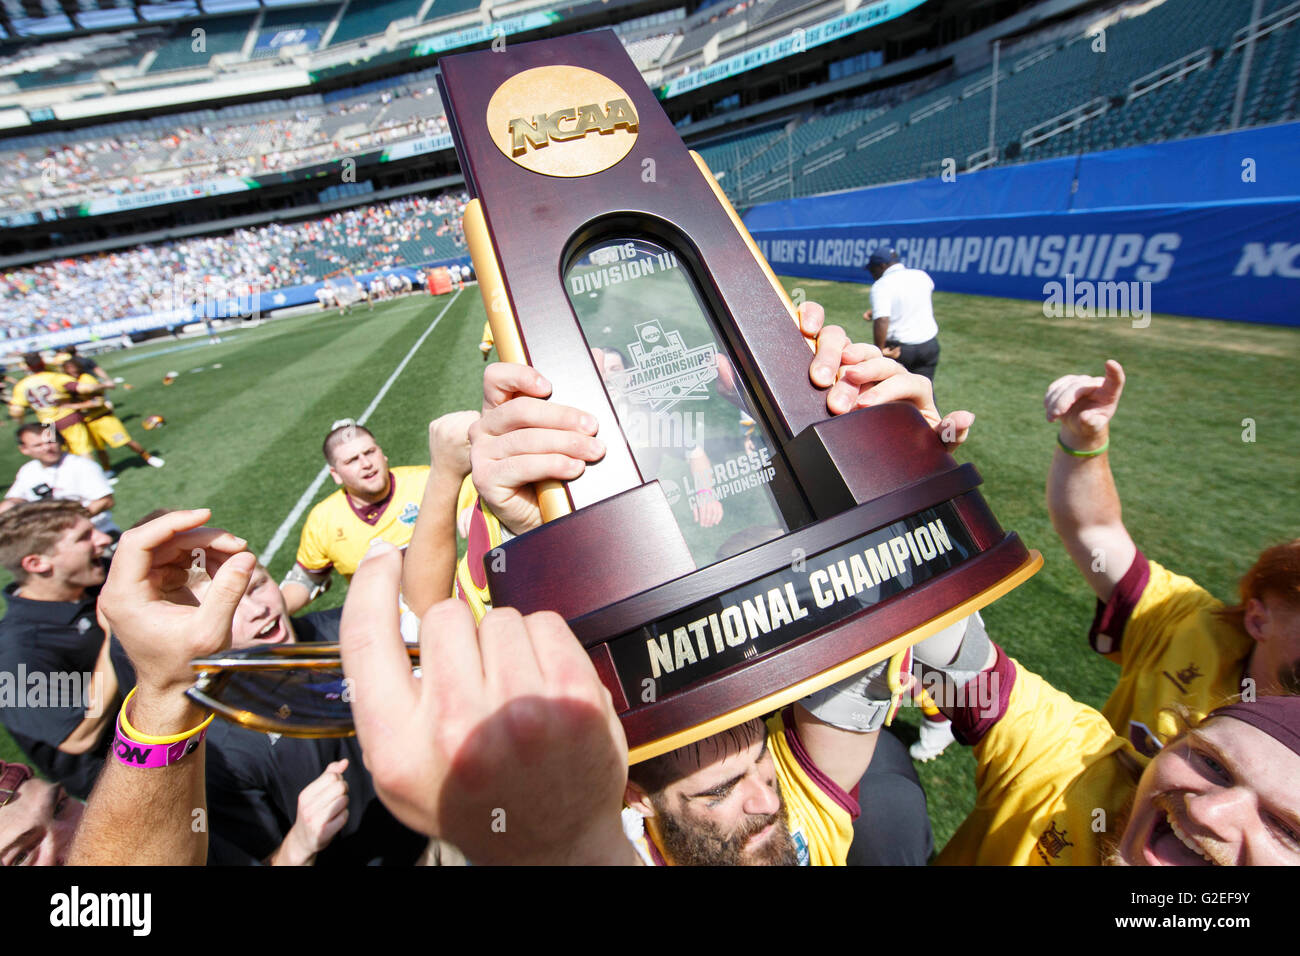 May 29, 2016: Salisbury Sea Gulls hold up the trophy following the NCAA Division III championship lacrosse match between the Salisbury Sea Gulls and the Tufts Jumbos at Lincoln Financial Field in Philadelphia, Pennsylvania. The Salisbury Sea Gulls won 14-13 to become the NCAA Division III National Champions. Christopher Szagola/CSM Stock Photo